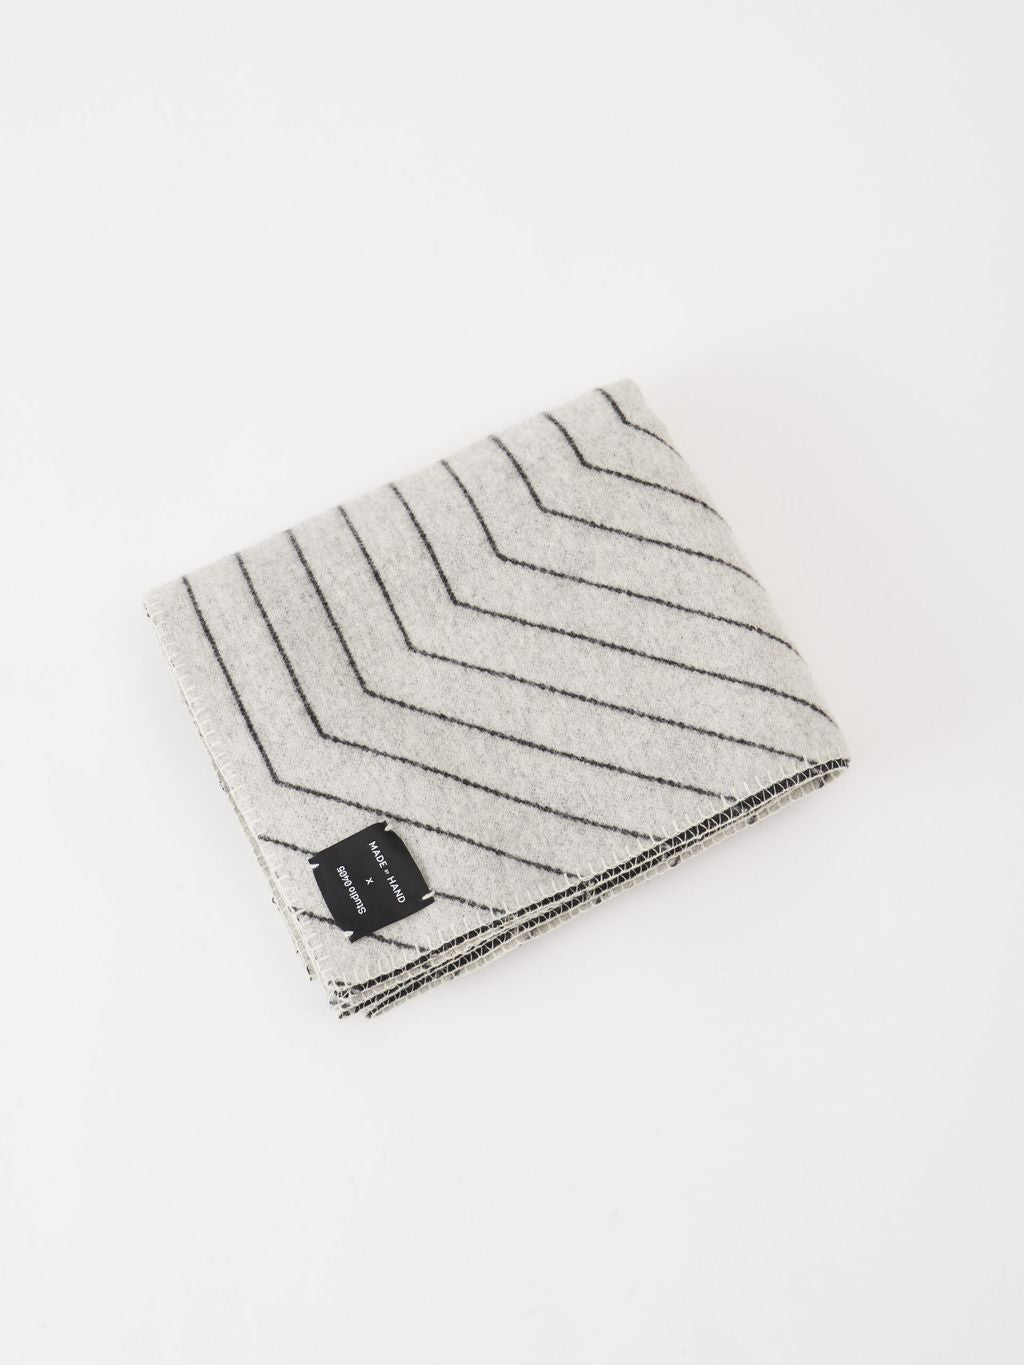 Made By Hand Pinstripe Blanket, Black